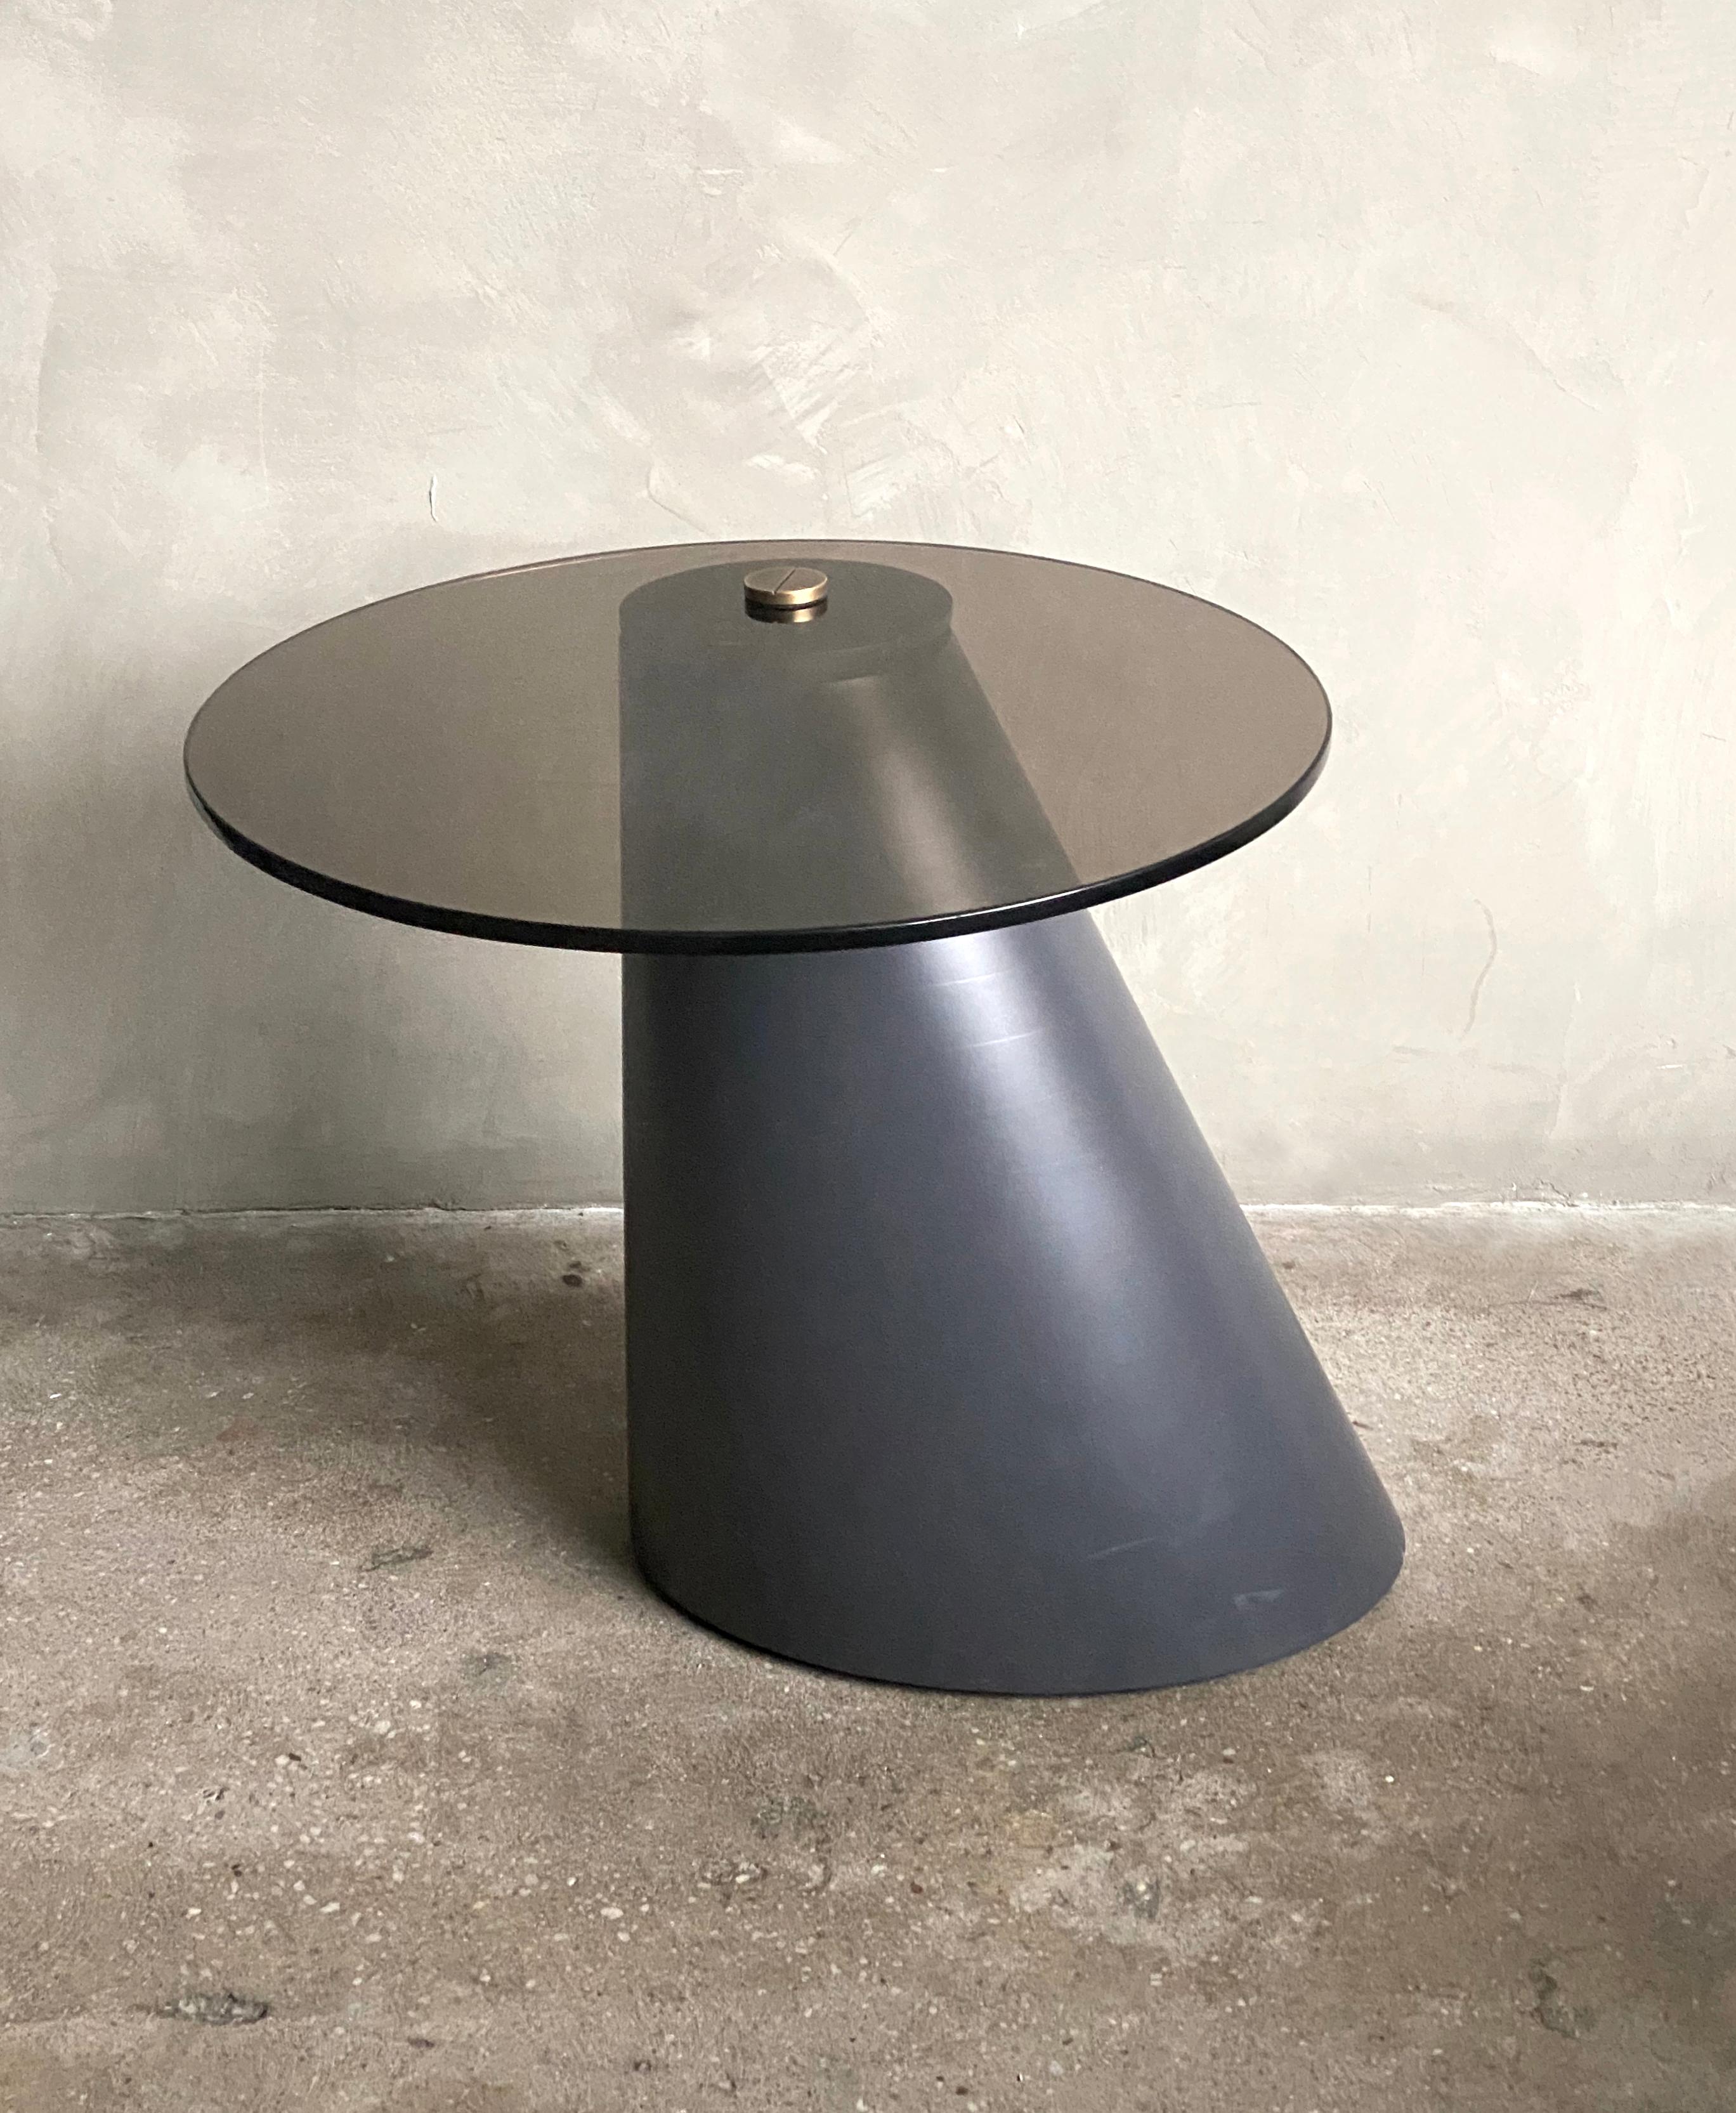 The different radial foot prints generated by the offset geometry of the Satellite Collection create a dynamic relationship with its surrounded environment. Like a satellite, the tabletop “orbits